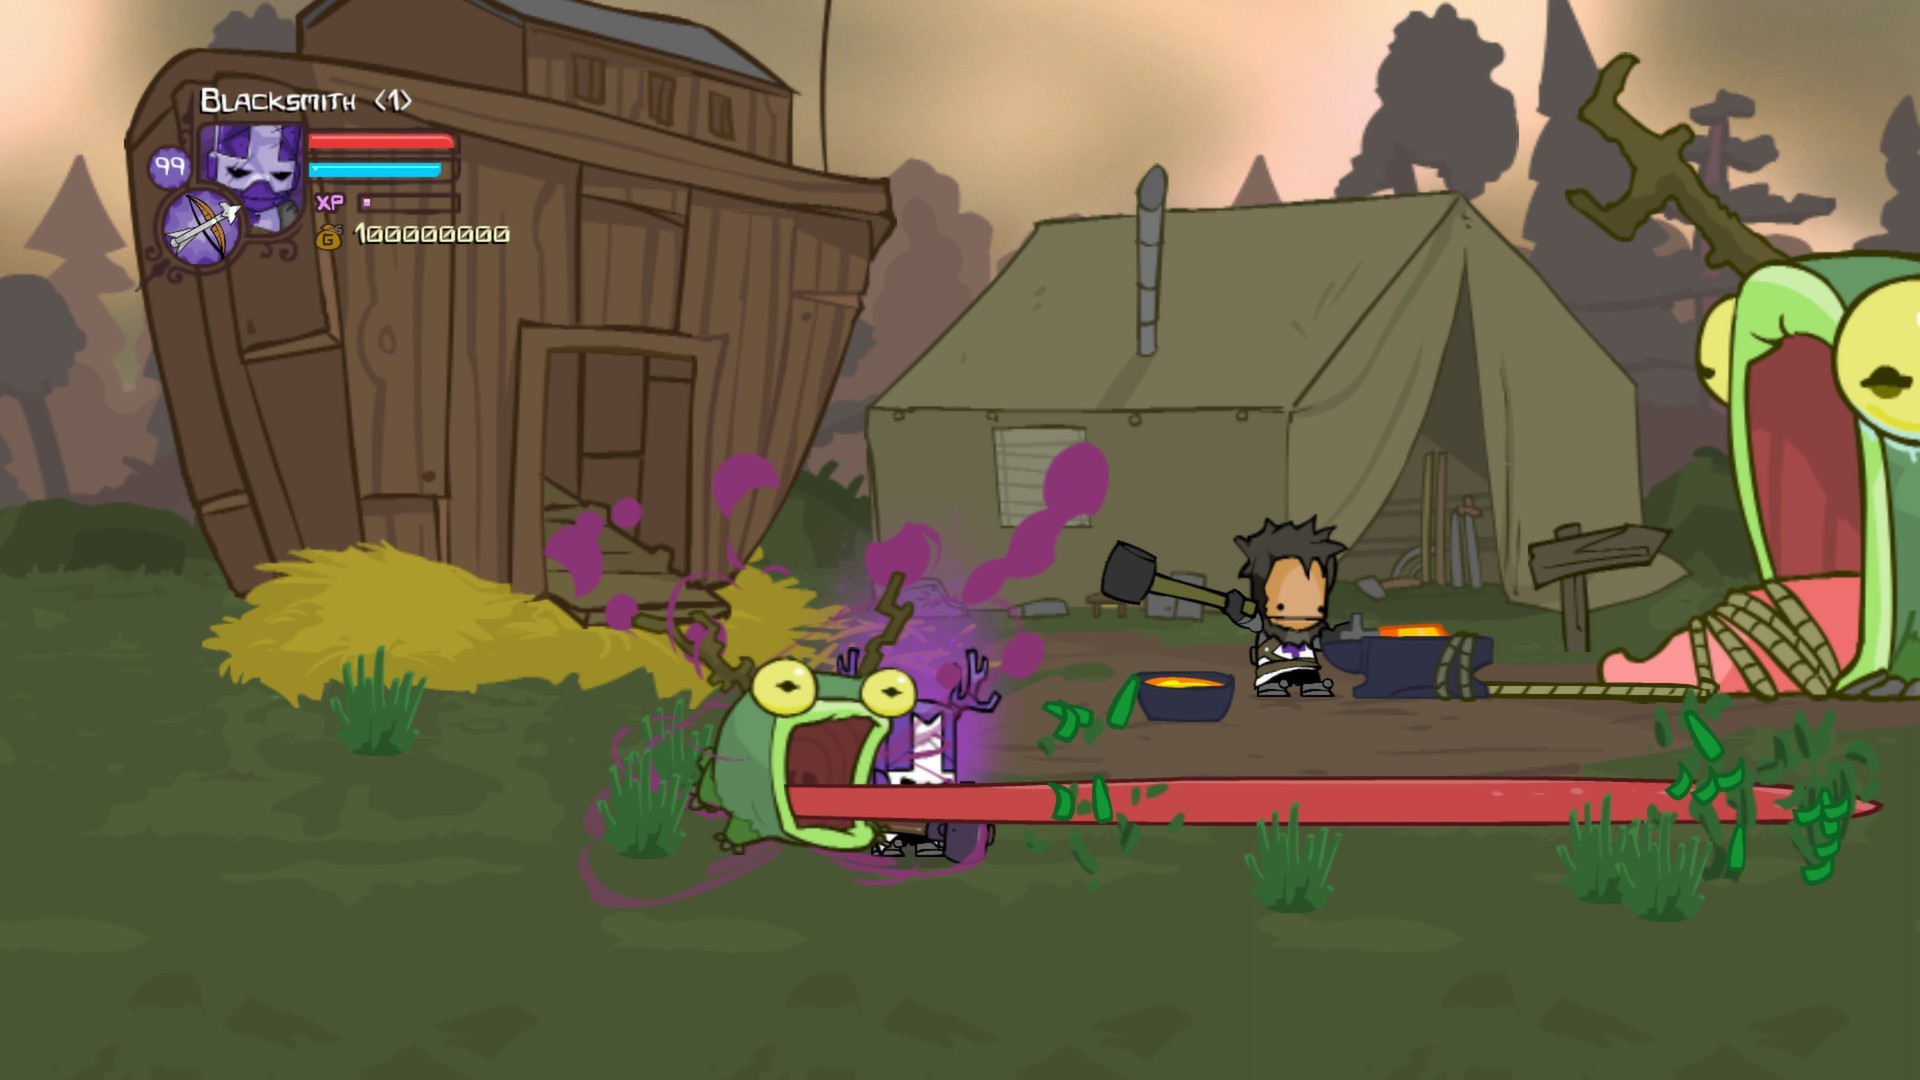 Castle Crashers is now available on Steam